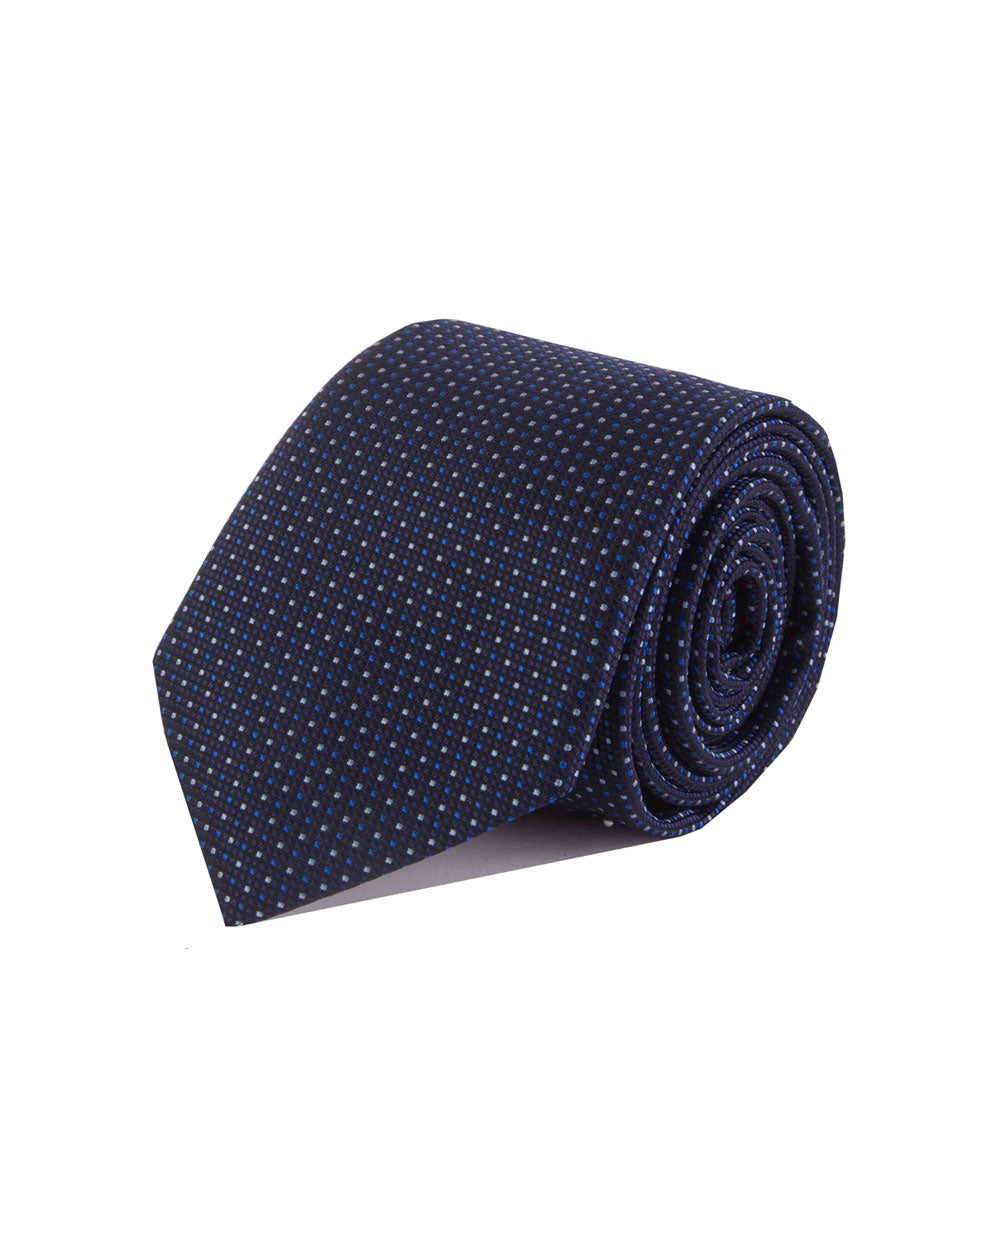 Double Two Extra Long Patterned Tie (navy/blue)